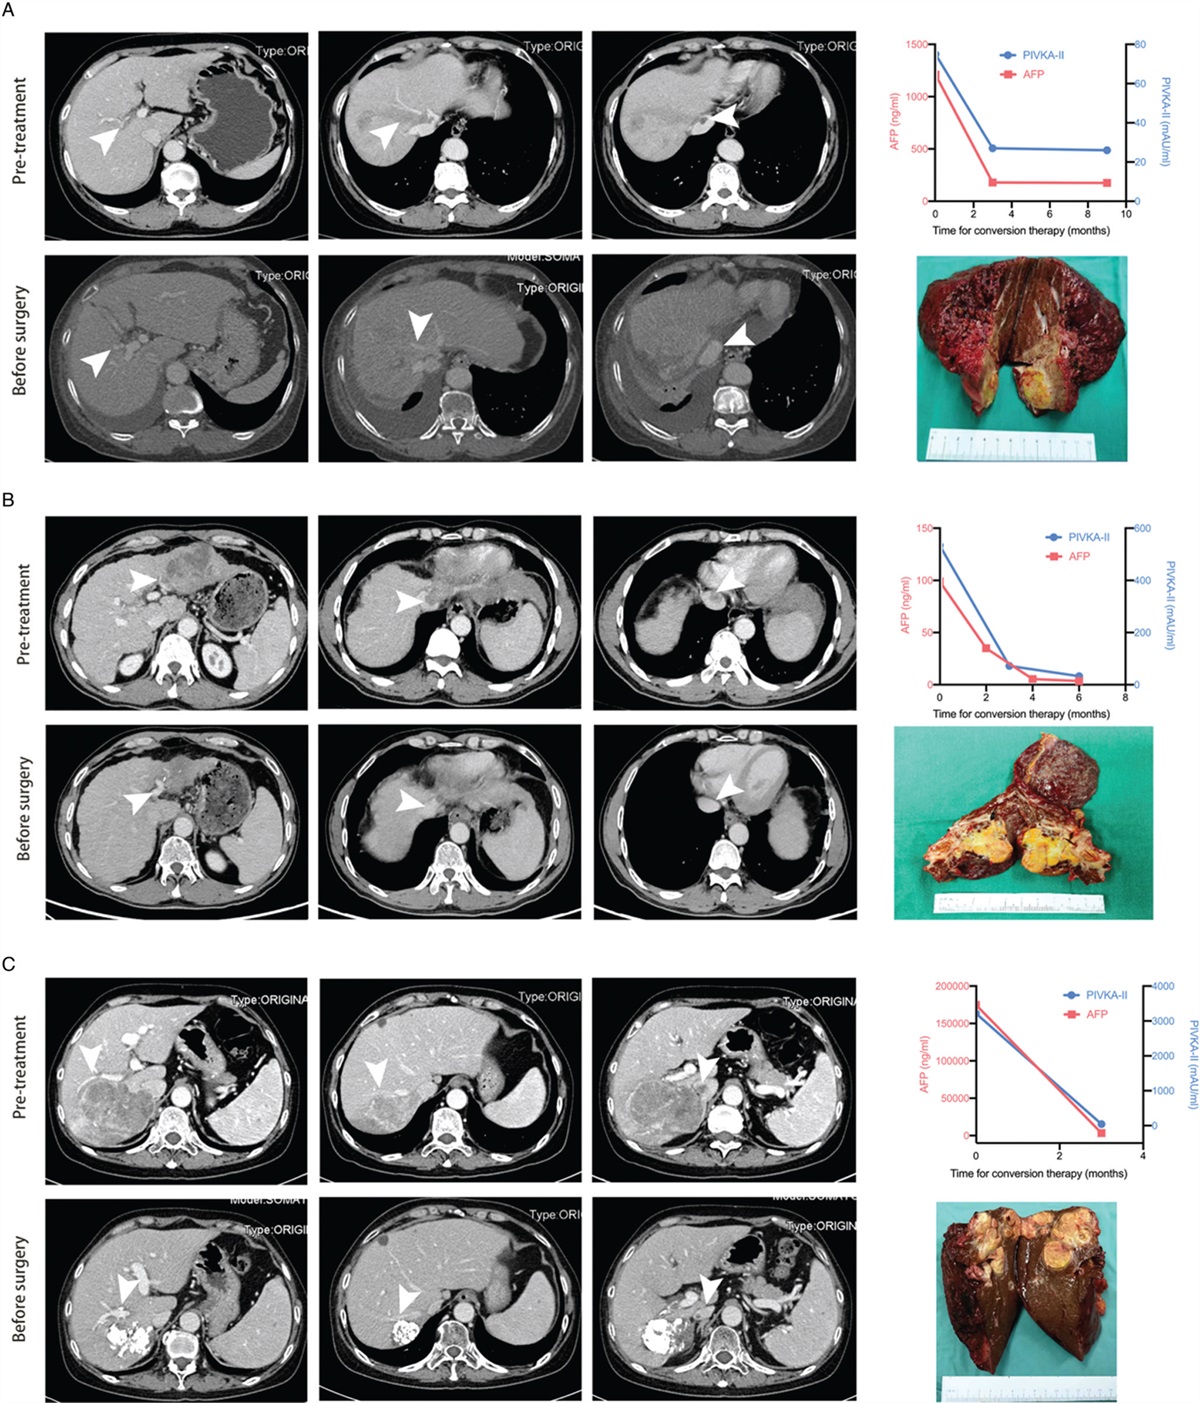 Conversion resection for patients with hepatocellular carcinoma and inferior vena cava tumor thrombus: a consecutive case series